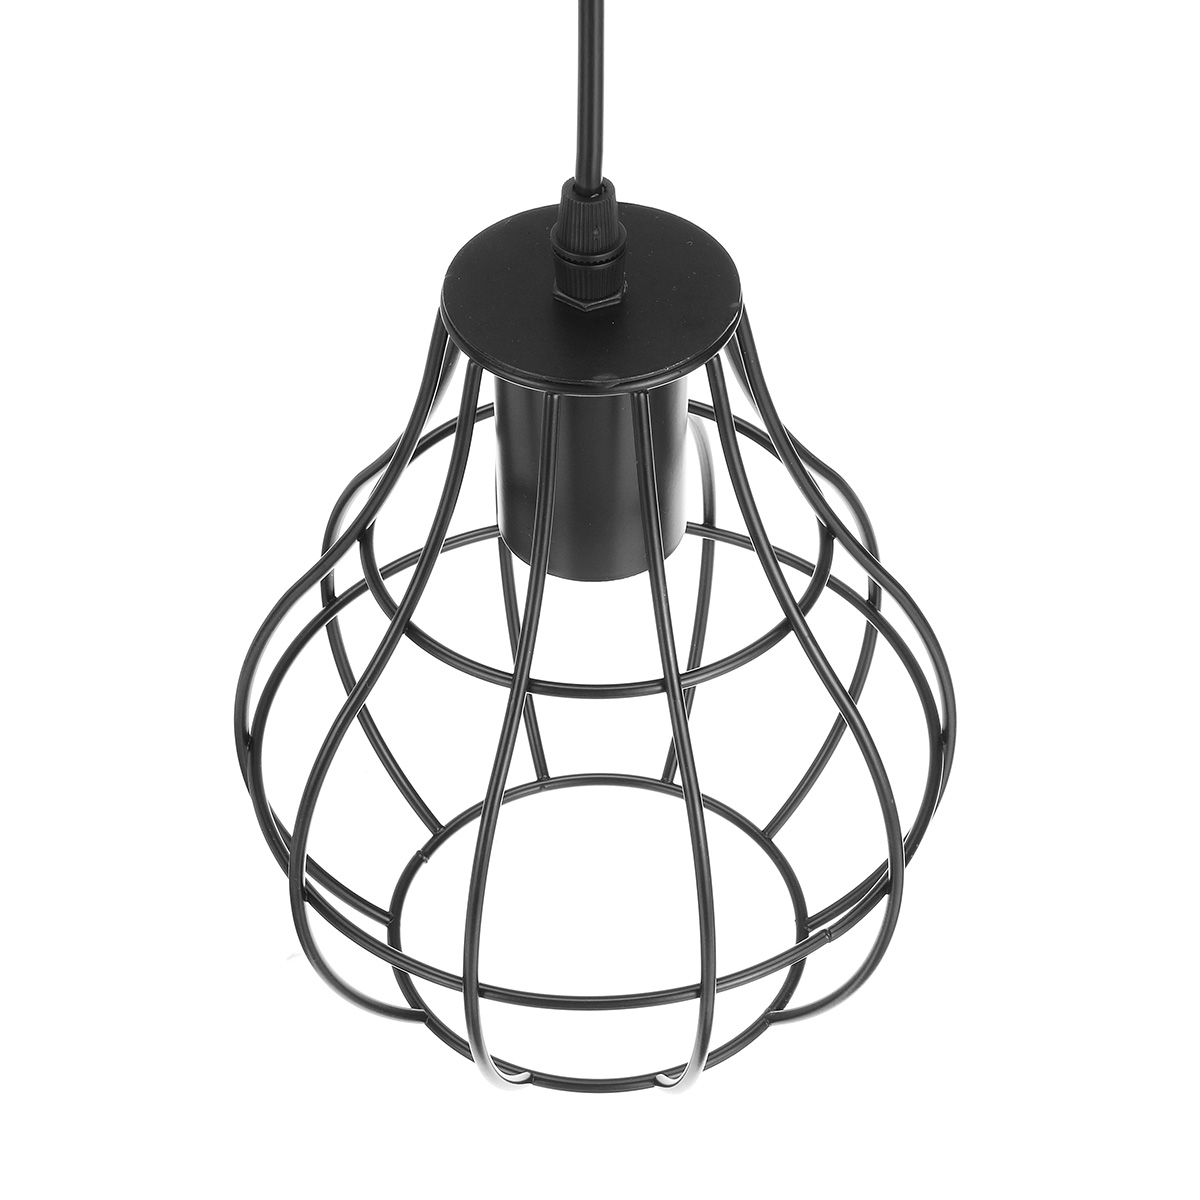 3-Lights-Industrial-Pendant-Lighting-Ceiling-Metal-Vintage-Hanging-Retro-Lamp-Without-Bulb-1710143-10